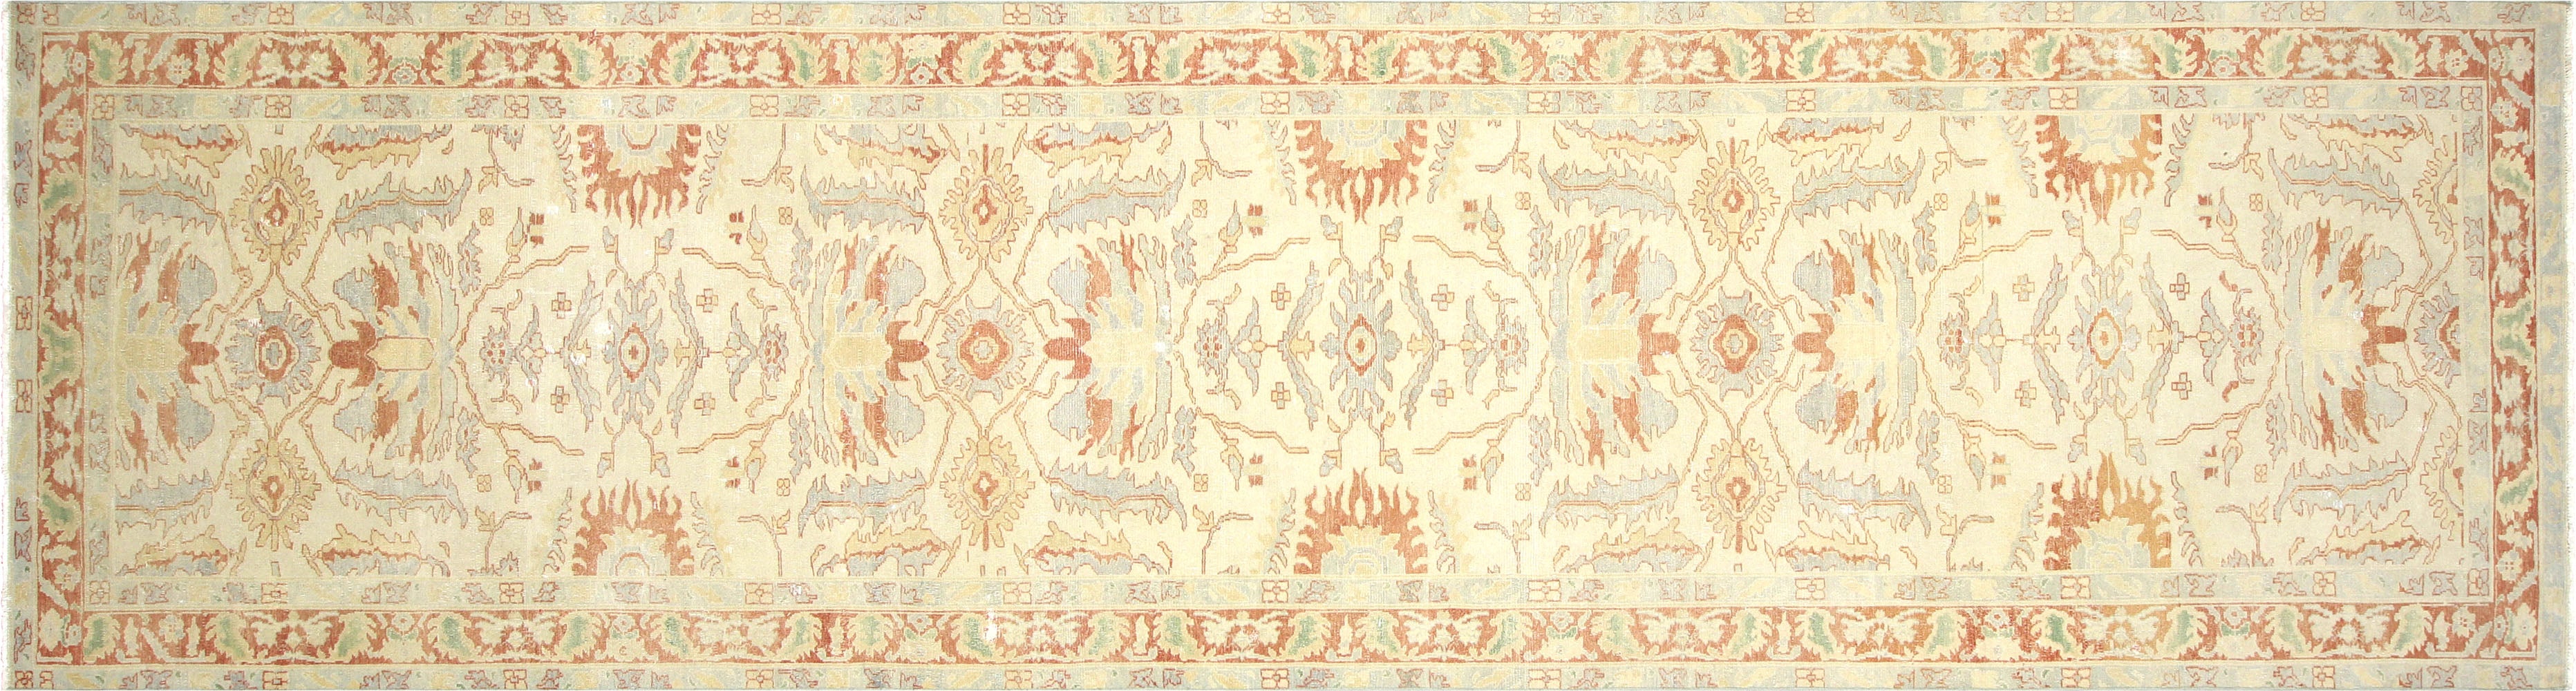 Recently Woven Egyptian Sultanabad Carpet - 4'10" x 18'2"